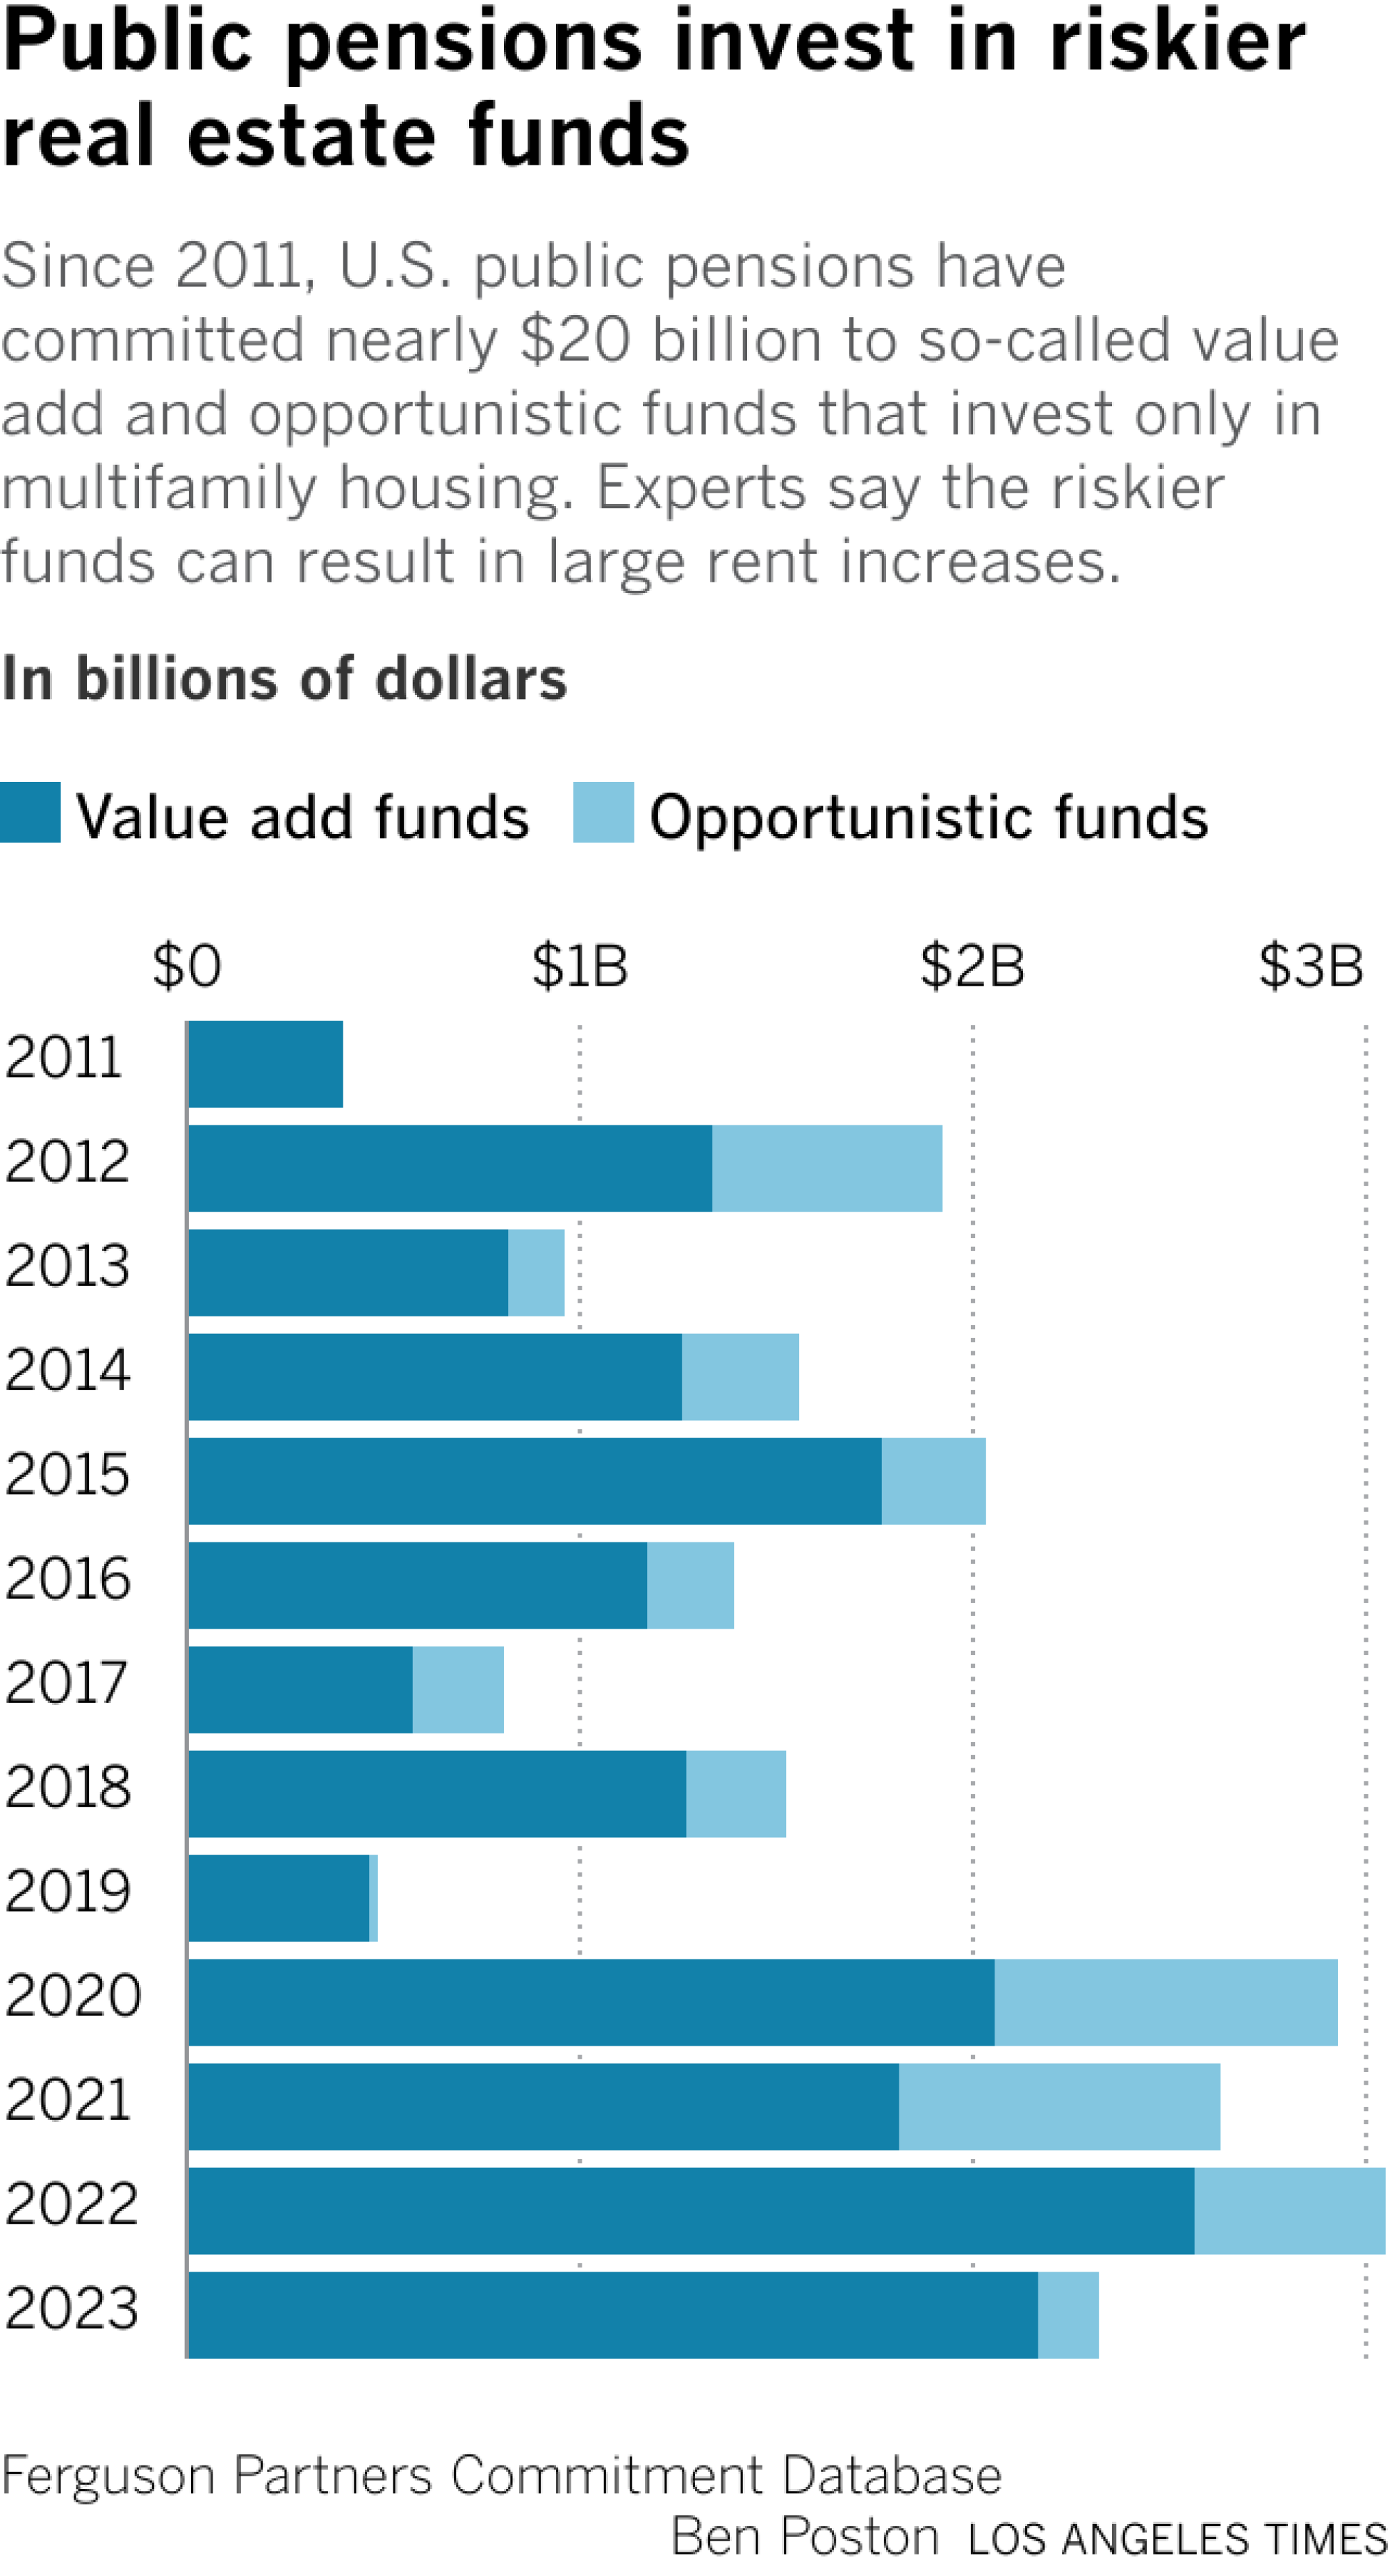 Chart shows that since 2011 U.S. public pensions have committed nearly $20 billion to "value add" and "opportunistic" funds that only invest in multifamily housing. This can result in large rent increases.